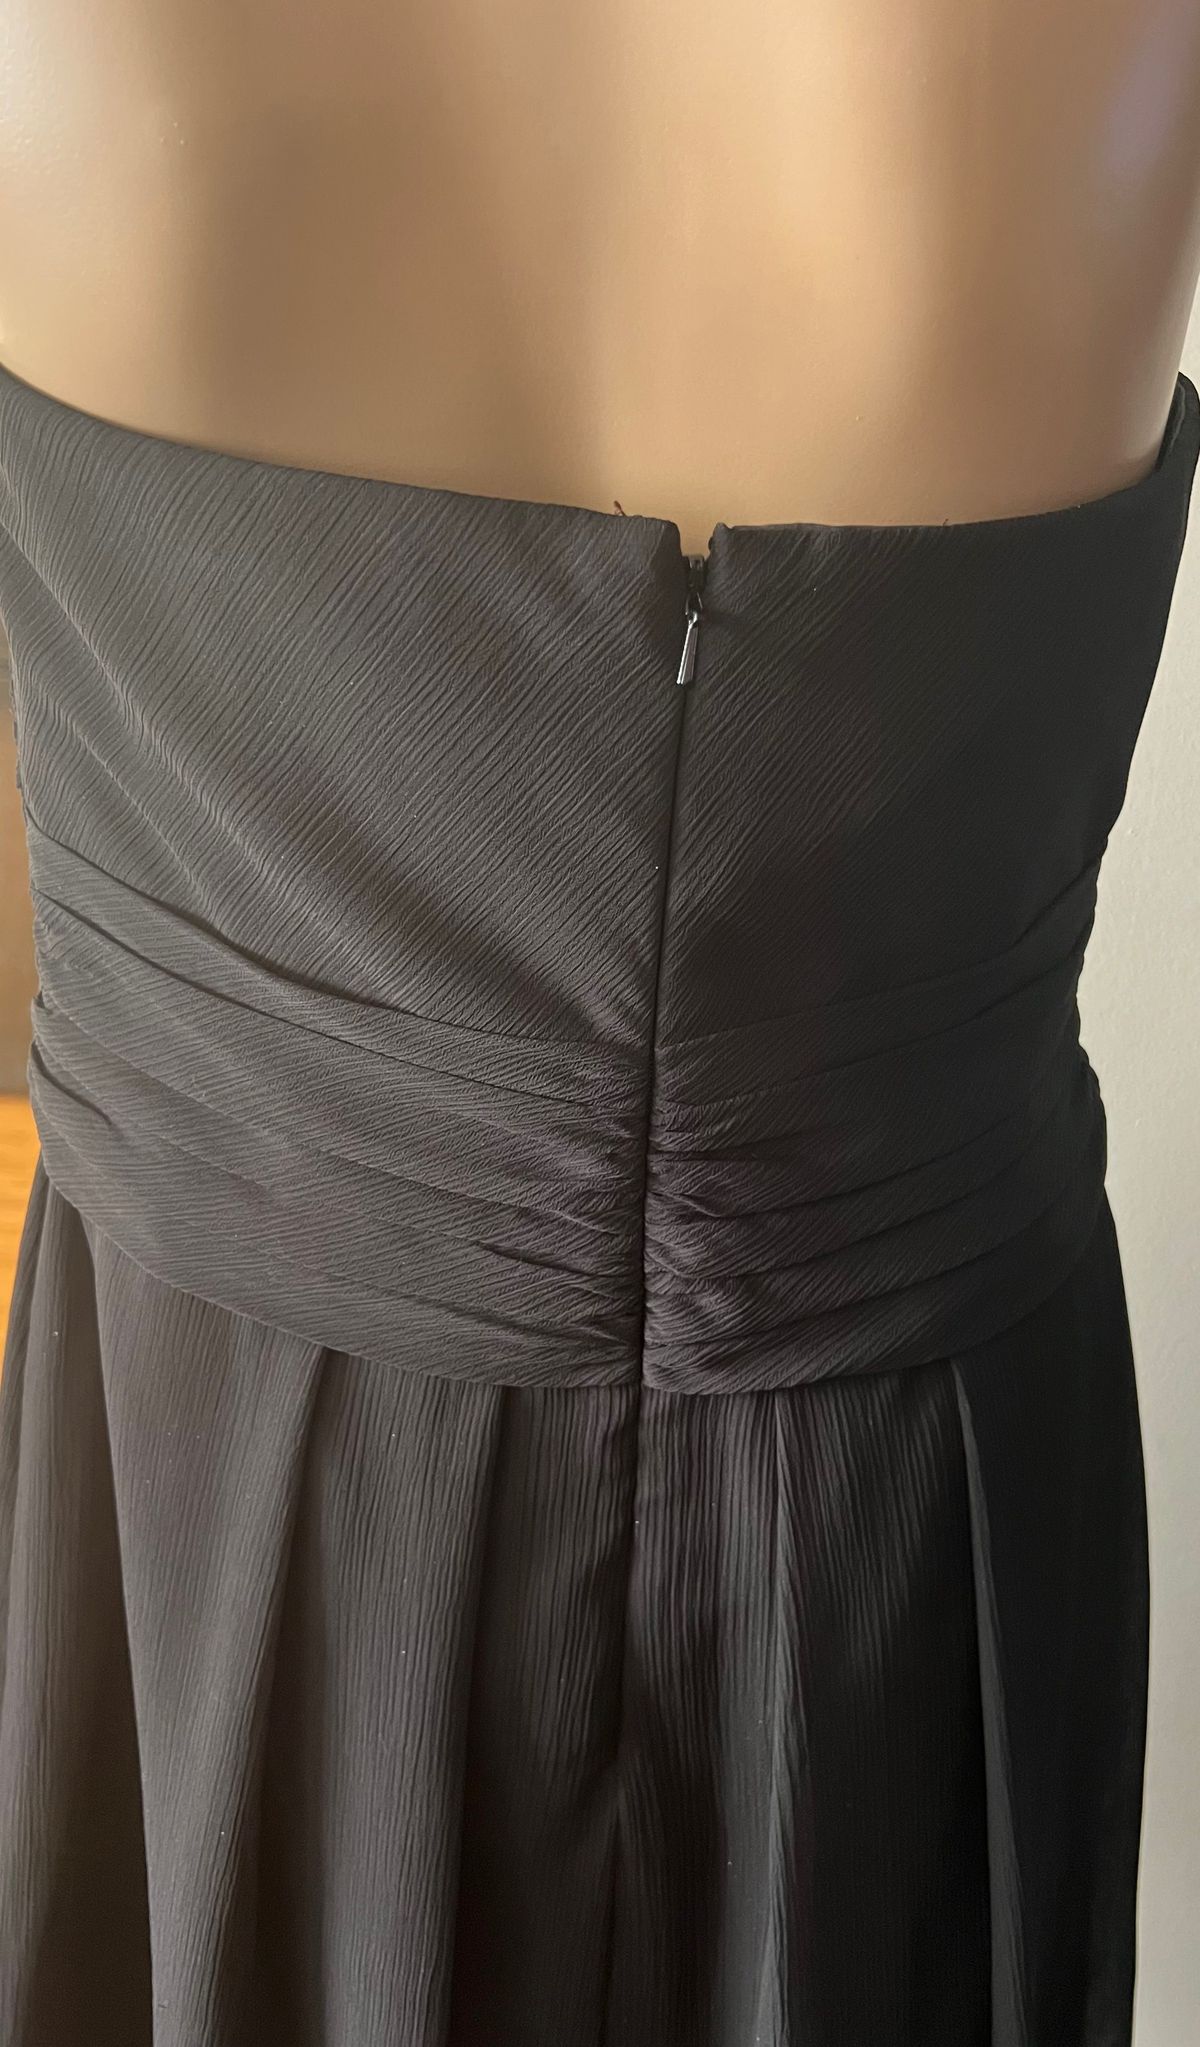 David's Bridal Size 8 Strapless Black Cocktail Dress on Queenly